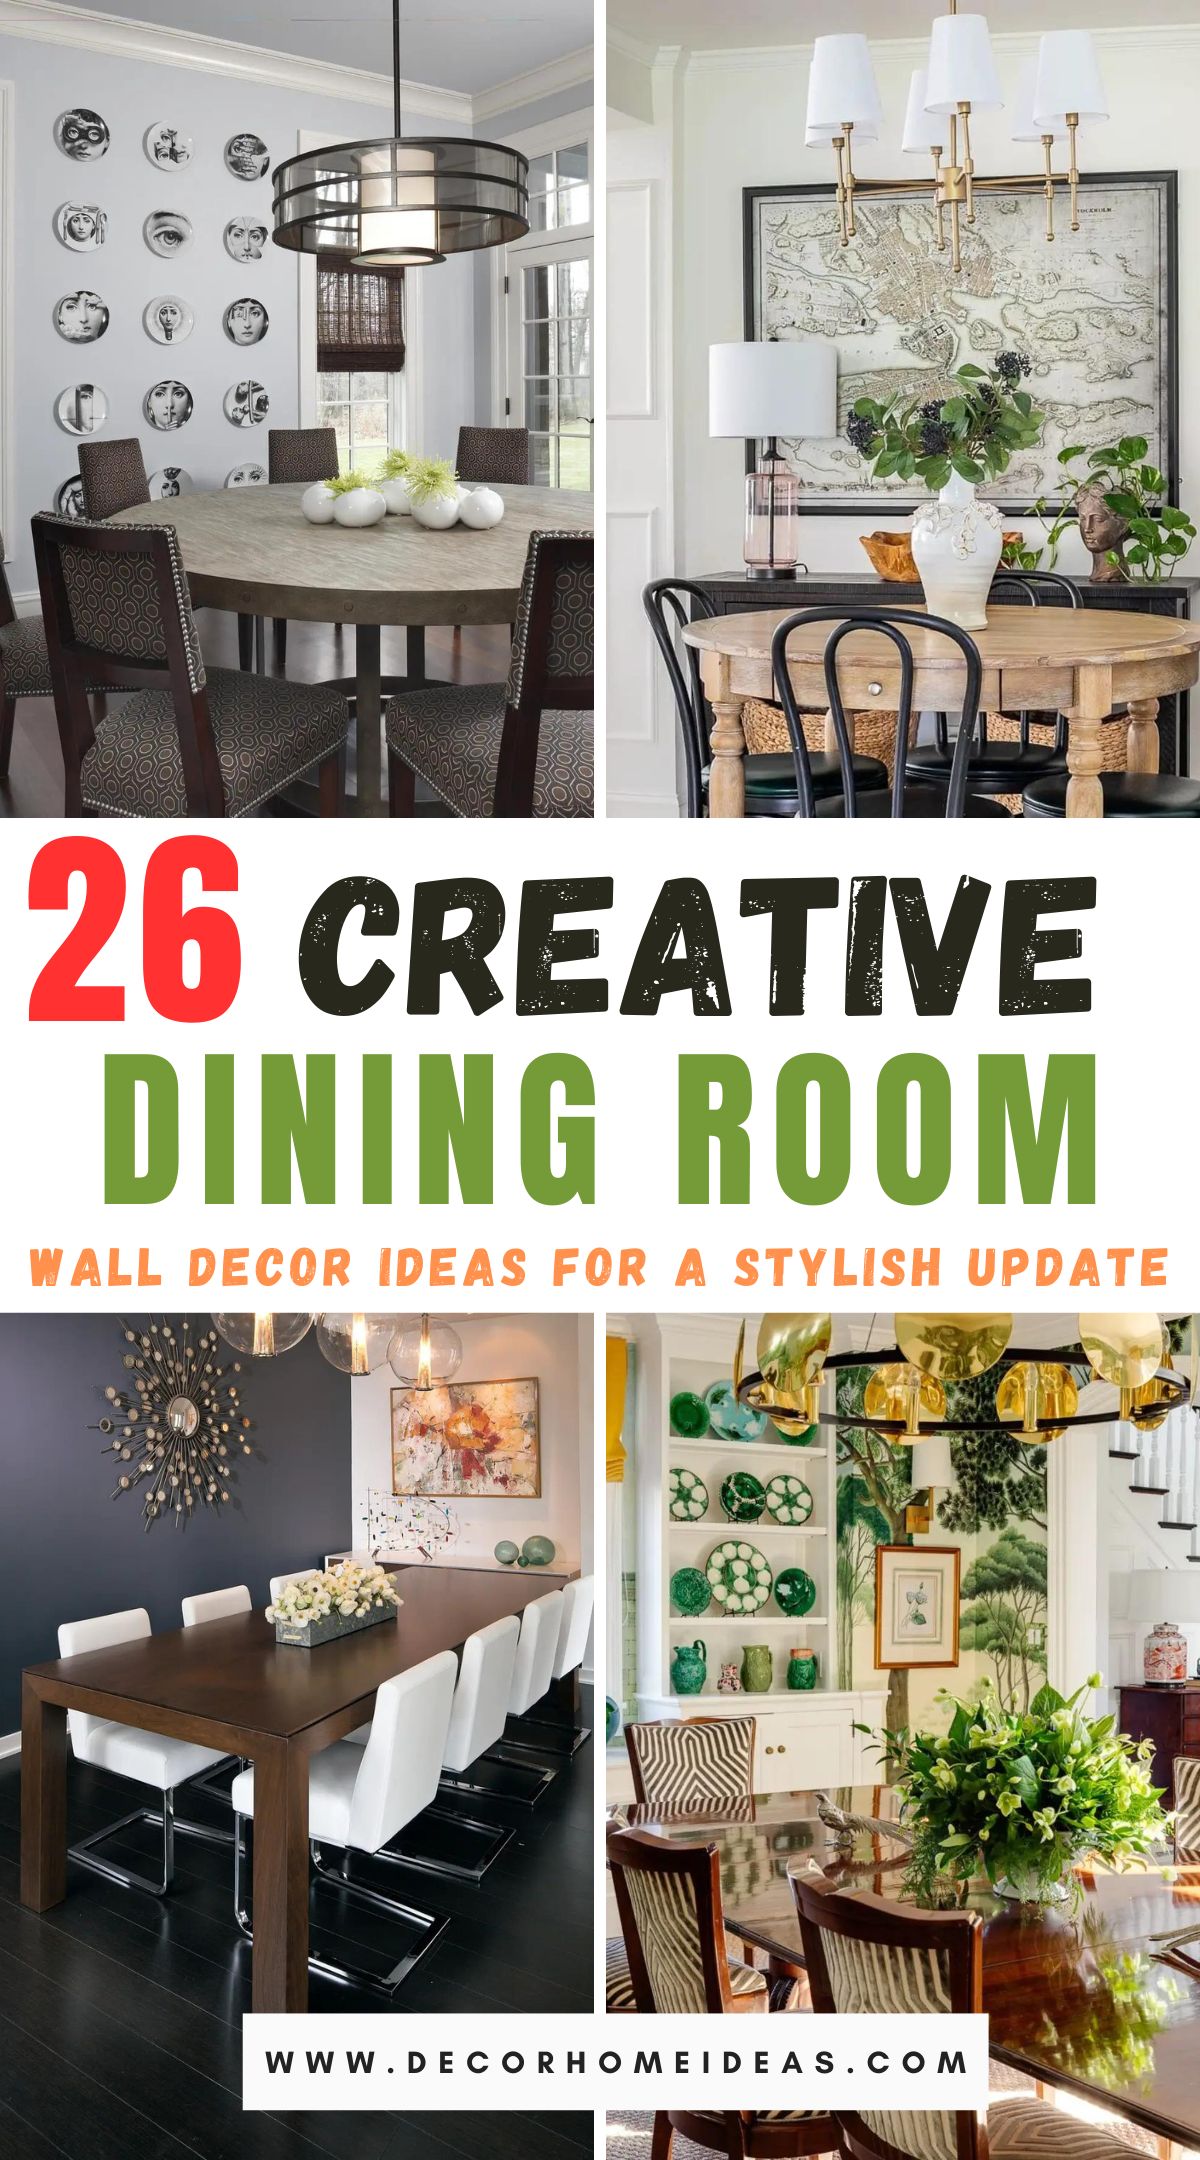 Transform your dining room with these 26 innovative ideas to revamp your walls. From creative artwork arrangements to unique decor concepts, discover inspiring solutions that breathe new life into your dining space.